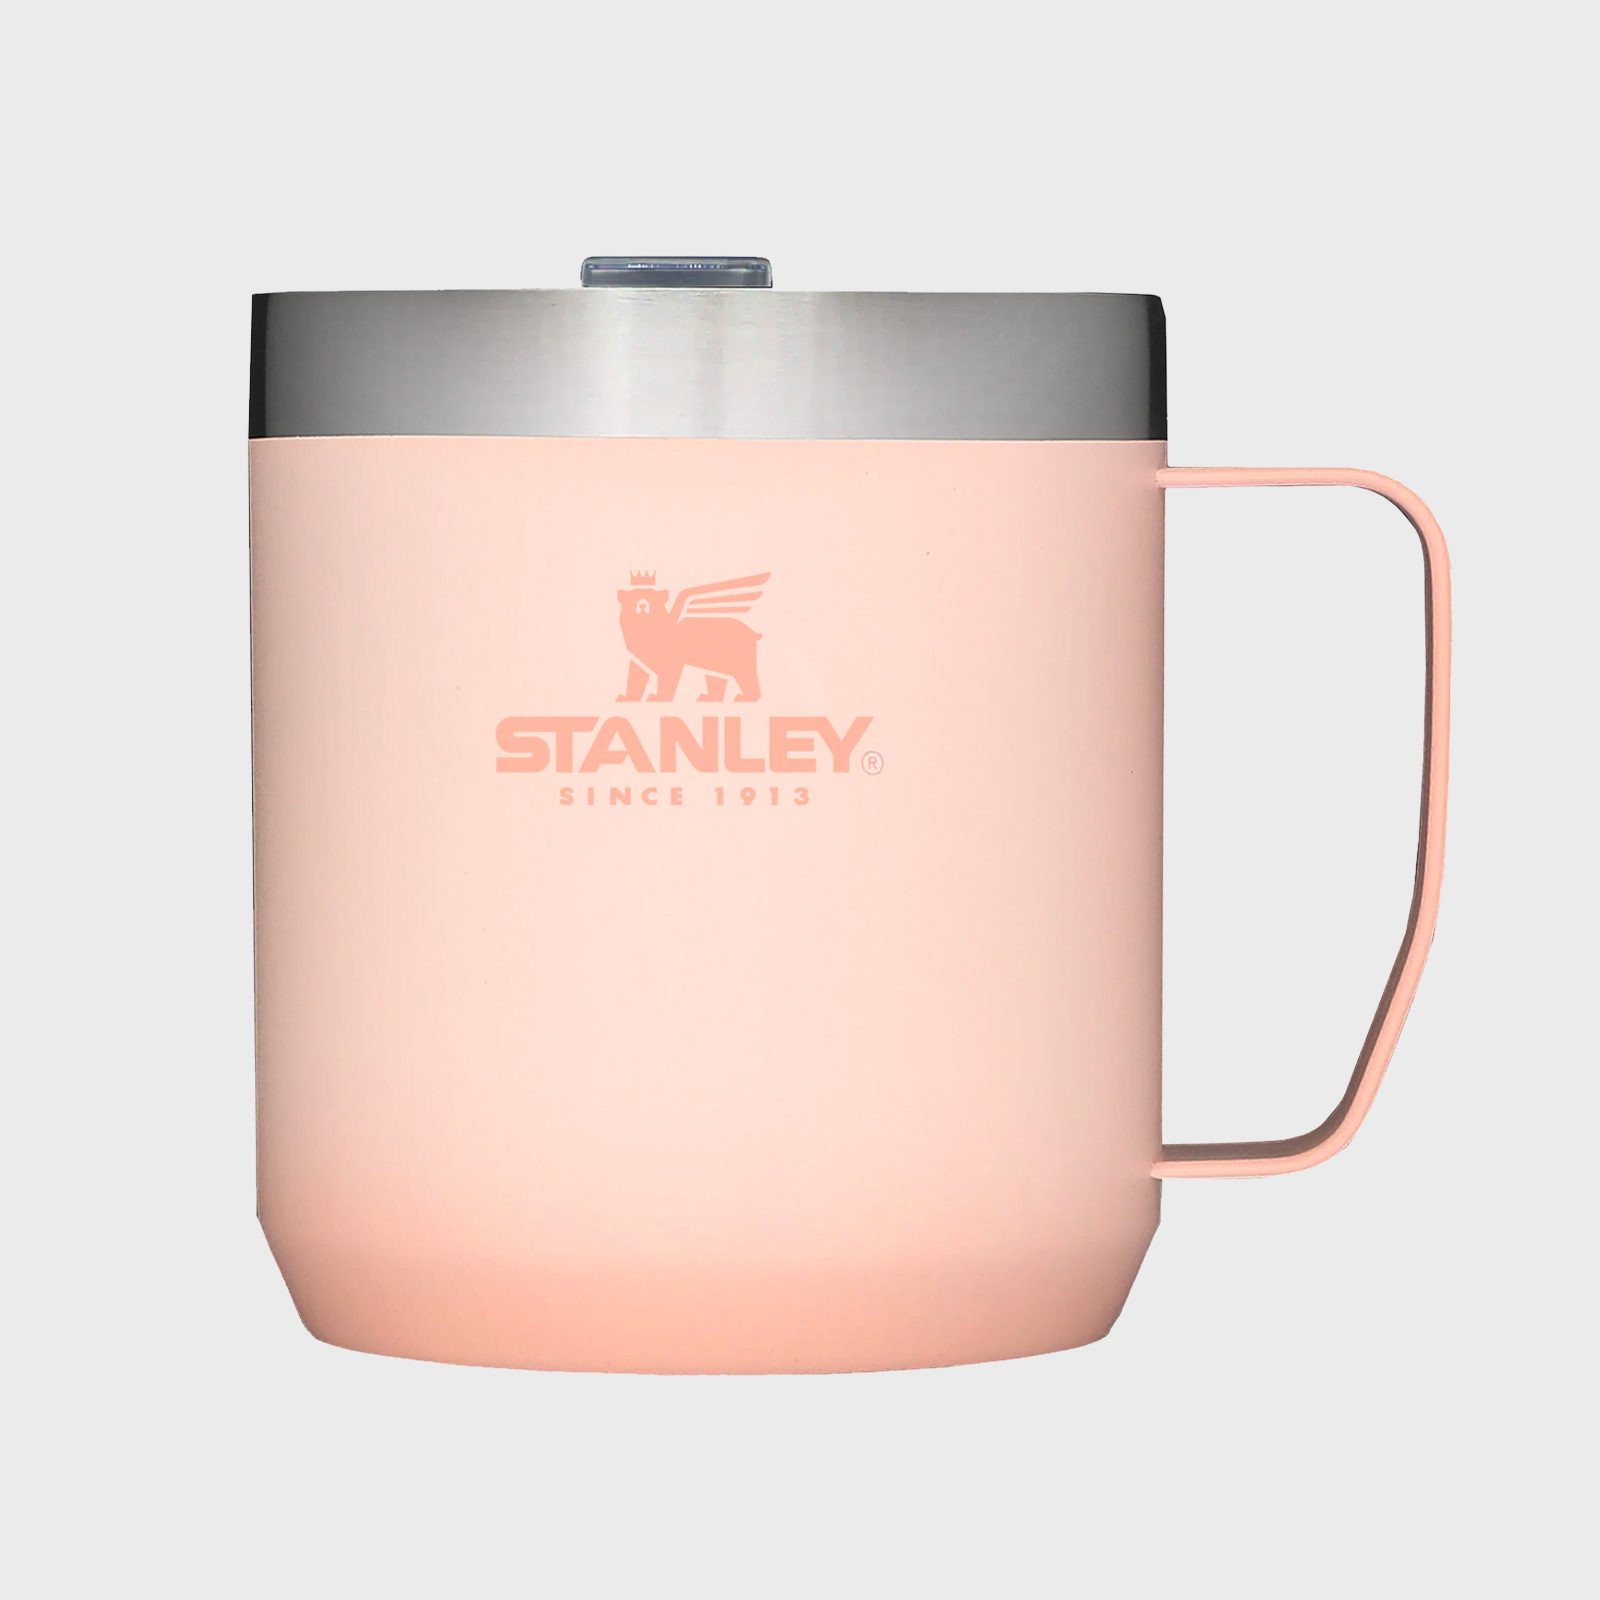 https://www.rd.com/wp-content/uploads/2022/05/RD-15-Best-Reusable-Coffee-Cups-Ecomm-Stanley.jpg?fit=700%2C700